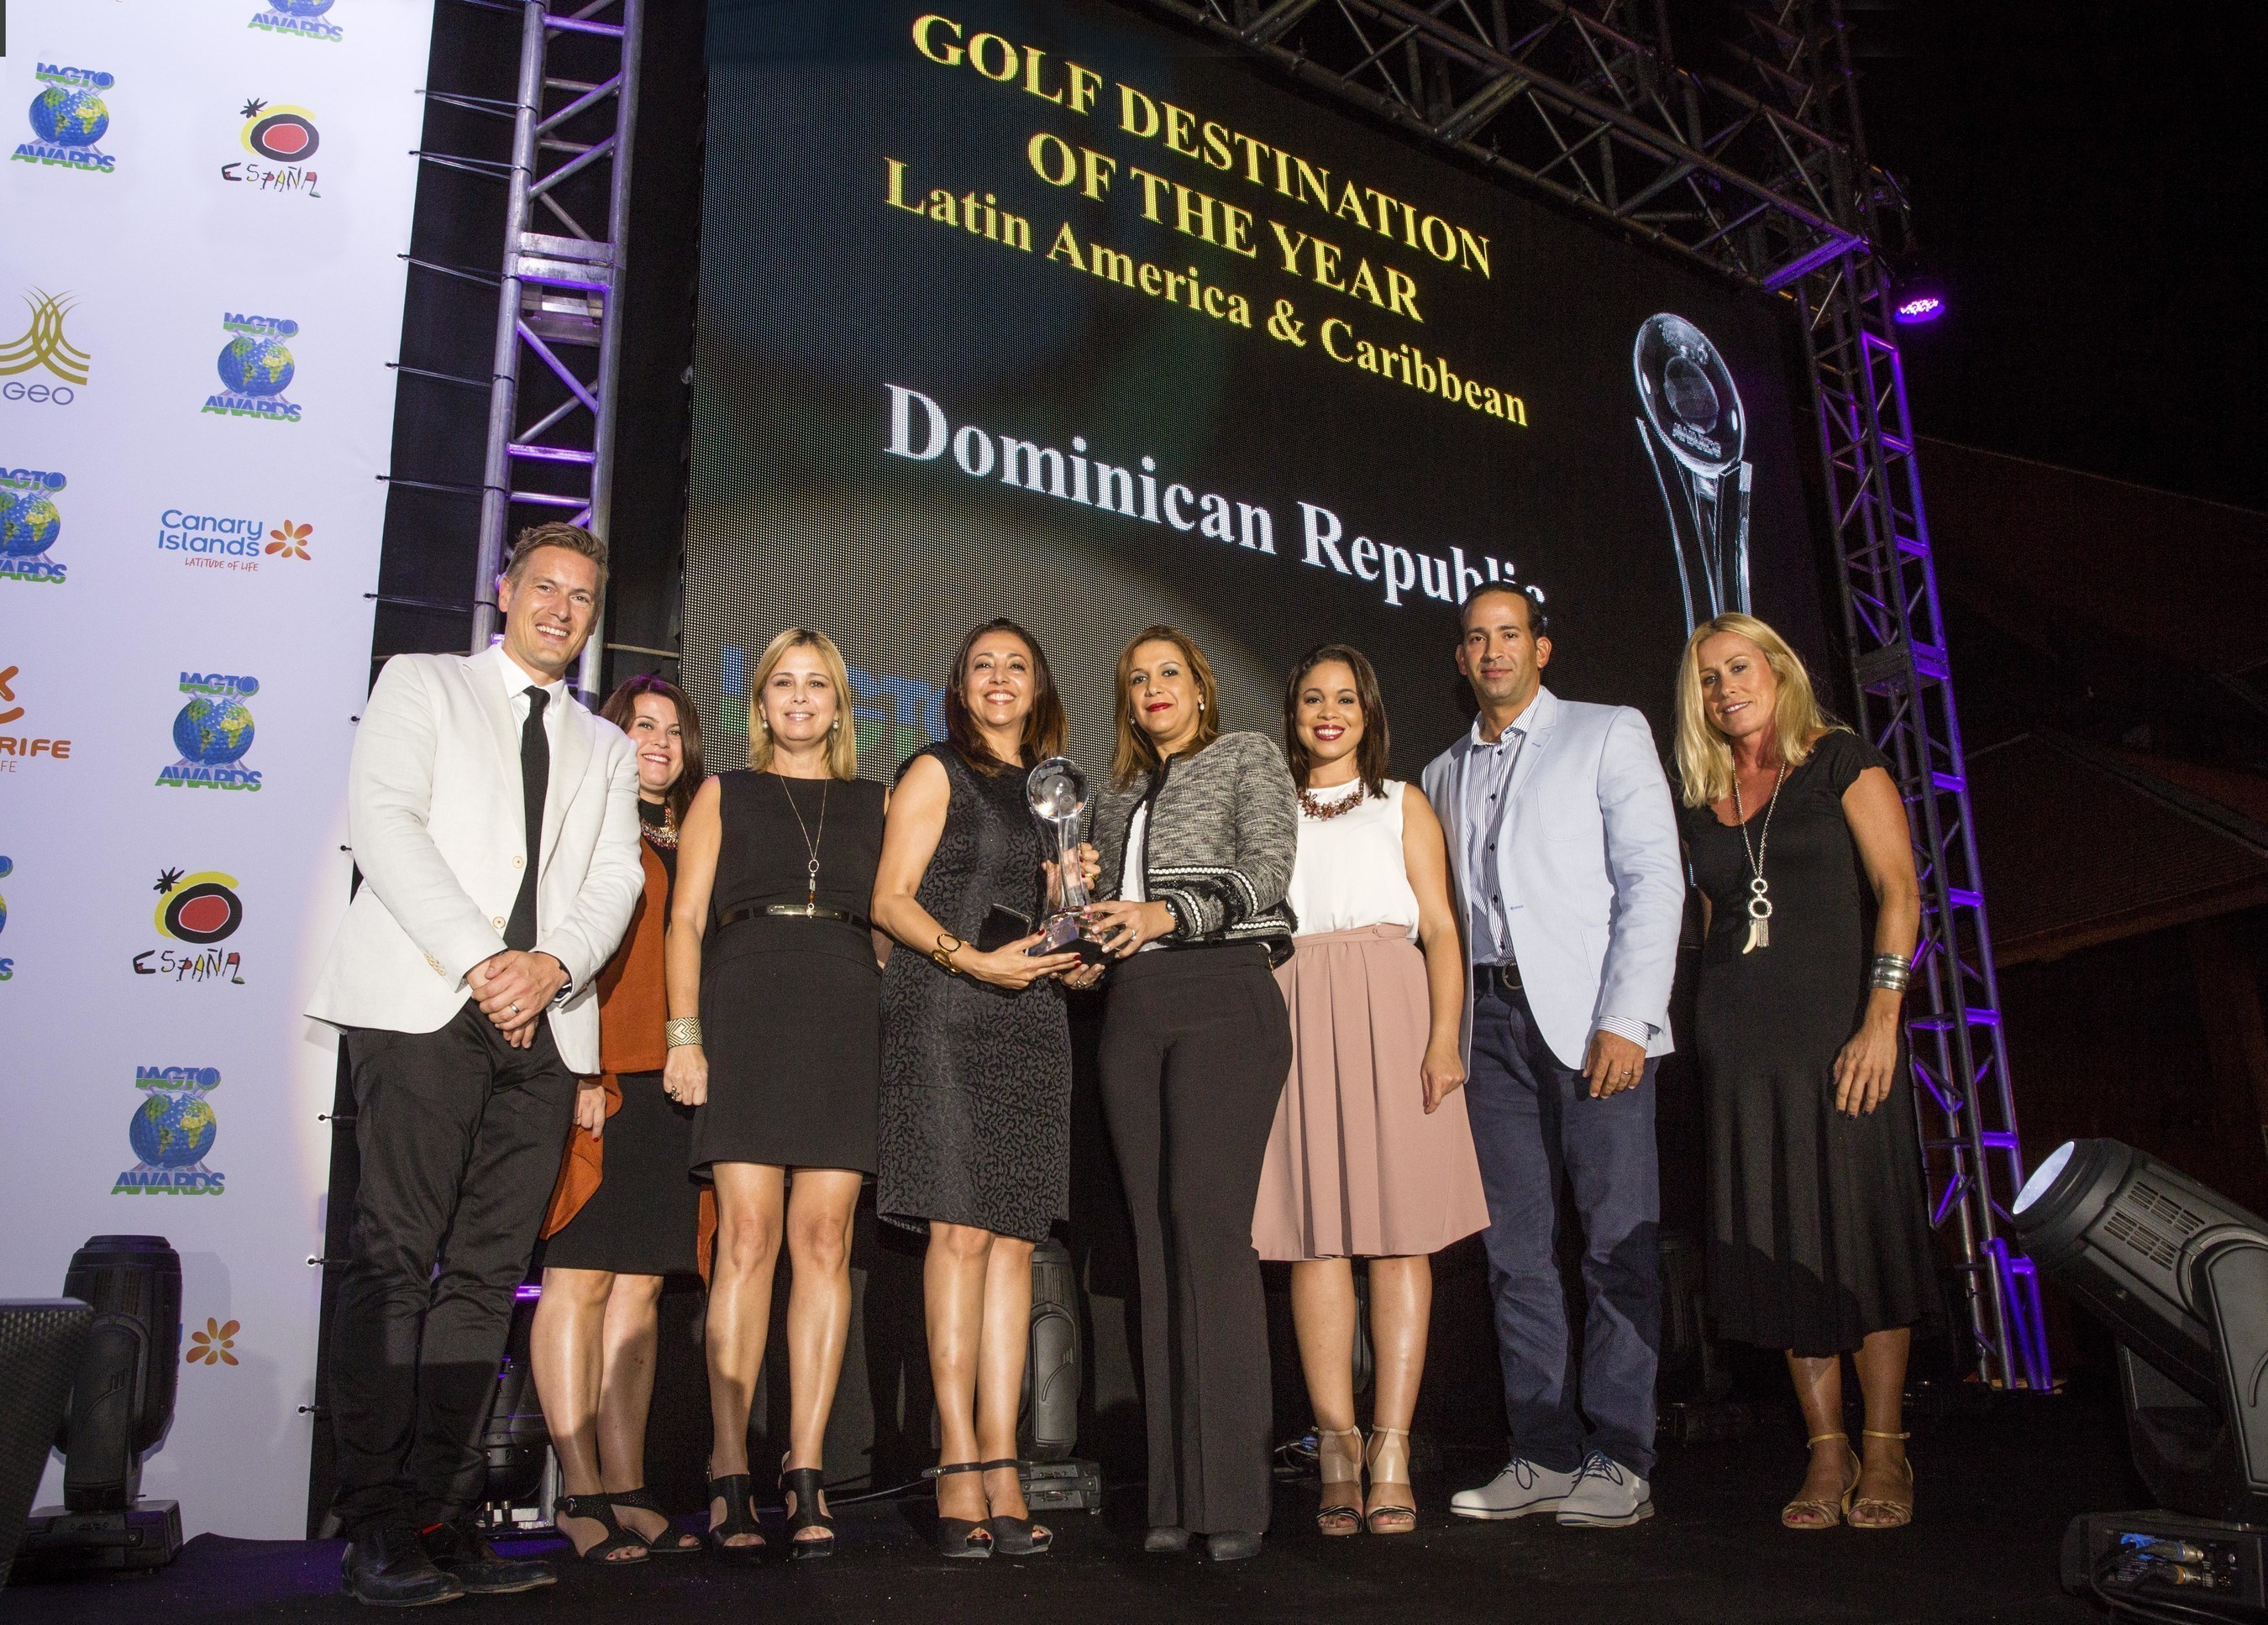 IAGTO presents the Golf Destination of the Year: Latin American & Caribbean 2016 award to the Dominican Republic Ministry of Tourism (MITUR) team. [From left to right: Giles Greenwood (IAGTO), Ana Gorrin (Catalonia Hotels & Resorts), Evelyn Paiewonsky (MITUR), Isabel Vasquez (MITUR - Iberian Peninsula), Giselle Diaz (MITUR), Carolina Perez (MITUR - Iberian Peninsula), Hiram Silfa (Puntacana Resort & Club), Monica Diaz (Casa de Campo Hotel & Villas)]